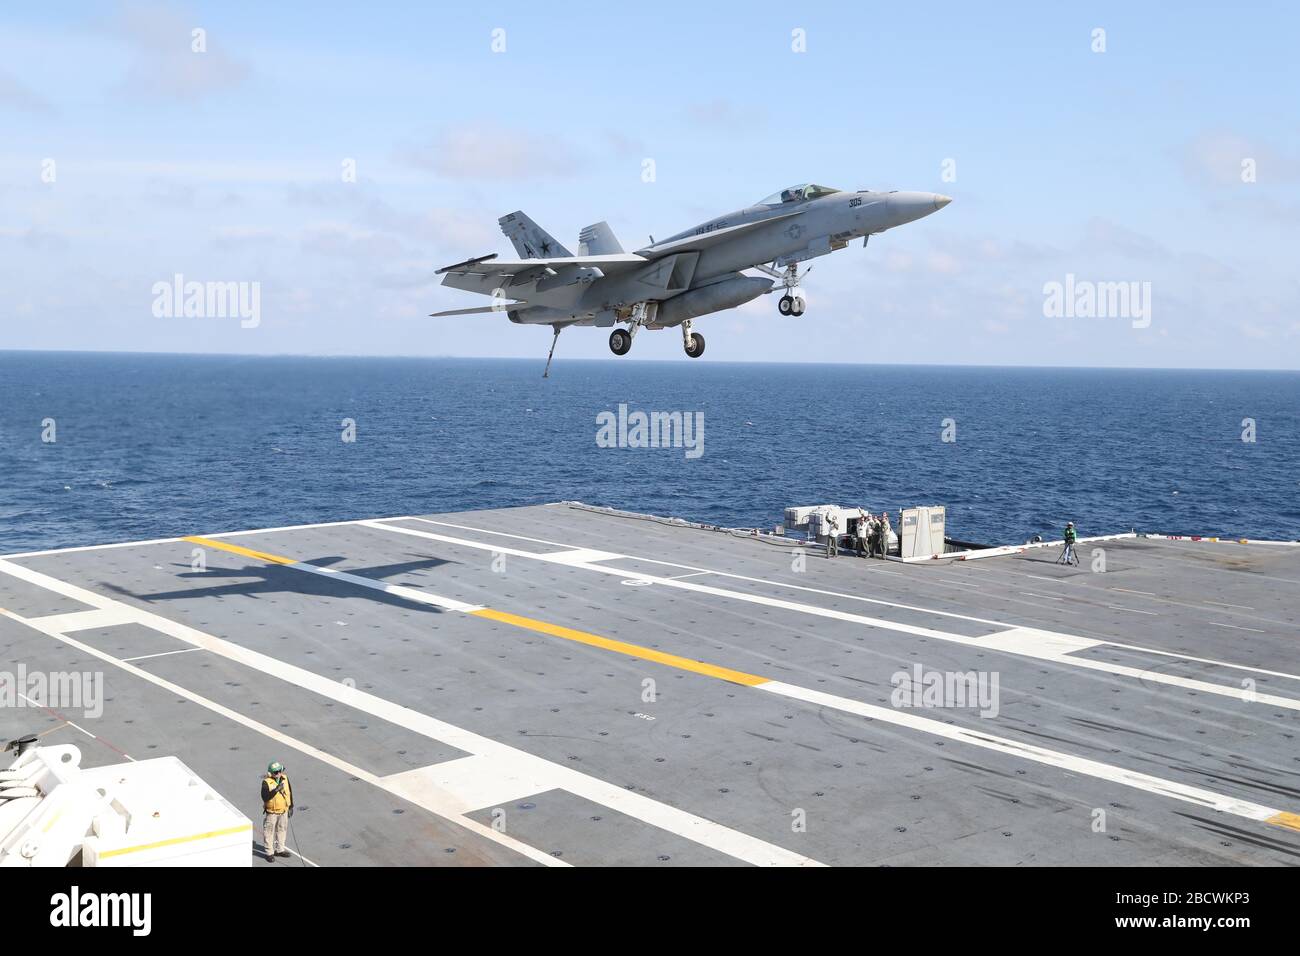 A U.S. Navy F/A-18E Hornet fighter aircraft, attached to Warhawks of Strike Fighter Squadron 97, is waved off as it makes its approach to the flight deck of the Ford-class aircraft carrier USS Gerald R. Ford underway conducting its flight deck and combat air traffic control center certification March 19, 2020 in the Atlantic Ocean. Stock Photo